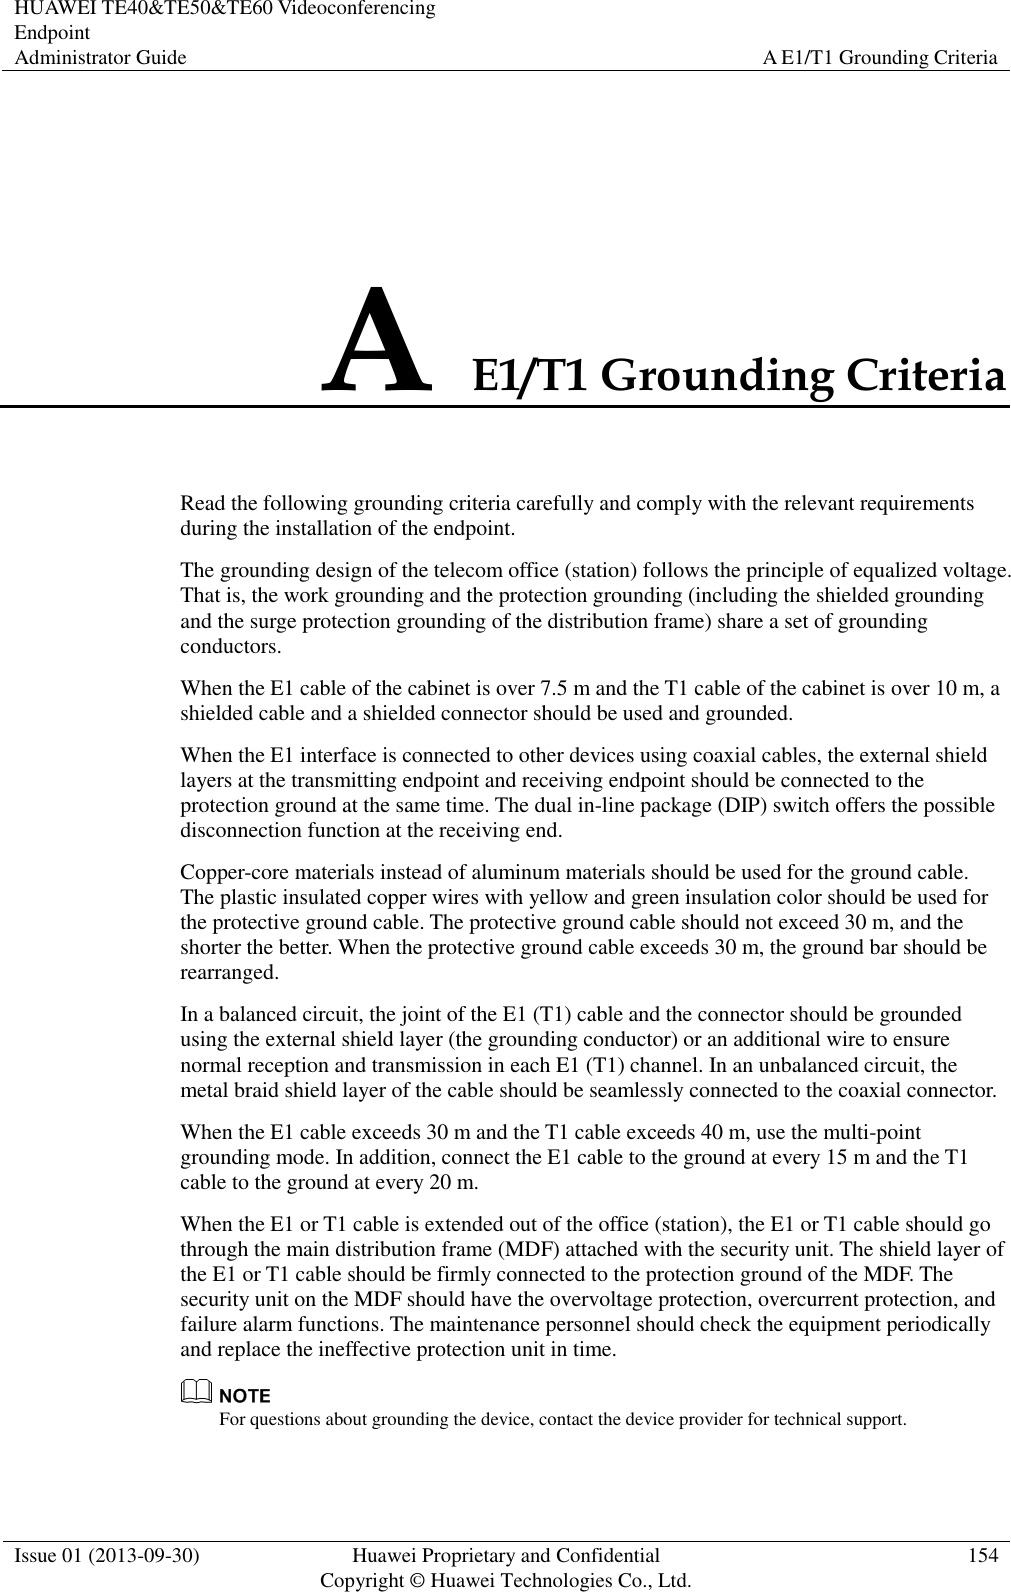 HUAWEI TE40&amp;TE50&amp;TE60 Videoconferencing Endpoint Administrator Guide A E1/T1 Grounding Criteria  Issue 01 (2013-09-30) Huawei Proprietary and Confidential                                     Copyright © Huawei Technologies Co., Ltd. 154  A E1/T1 Grounding Criteria Read the following grounding criteria carefully and comply with the relevant requirements during the installation of the endpoint. The grounding design of the telecom office (station) follows the principle of equalized voltage. That is, the work grounding and the protection grounding (including the shielded grounding and the surge protection grounding of the distribution frame) share a set of grounding conductors. When the E1 cable of the cabinet is over 7.5 m and the T1 cable of the cabinet is over 10 m, a shielded cable and a shielded connector should be used and grounded. When the E1 interface is connected to other devices using coaxial cables, the external shield layers at the transmitting endpoint and receiving endpoint should be connected to the protection ground at the same time. The dual in-line package (DIP) switch offers the possible disconnection function at the receiving end. Copper-core materials instead of aluminum materials should be used for the ground cable. The plastic insulated copper wires with yellow and green insulation color should be used for the protective ground cable. The protective ground cable should not exceed 30 m, and the shorter the better. When the protective ground cable exceeds 30 m, the ground bar should be rearranged. In a balanced circuit, the joint of the E1 (T1) cable and the connector should be grounded using the external shield layer (the grounding conductor) or an additional wire to ensure normal reception and transmission in each E1 (T1) channel. In an unbalanced circuit, the metal braid shield layer of the cable should be seamlessly connected to the coaxial connector. When the E1 cable exceeds 30 m and the T1 cable exceeds 40 m, use the multi-point grounding mode. In addition, connect the E1 cable to the ground at every 15 m and the T1 cable to the ground at every 20 m. When the E1 or T1 cable is extended out of the office (station), the E1 or T1 cable should go through the main distribution frame (MDF) attached with the security unit. The shield layer of the E1 or T1 cable should be firmly connected to the protection ground of the MDF. The security unit on the MDF should have the overvoltage protection, overcurrent protection, and failure alarm functions. The maintenance personnel should check the equipment periodically and replace the ineffective protection unit in time.  For questions about grounding the device, contact the device provider for technical support. 